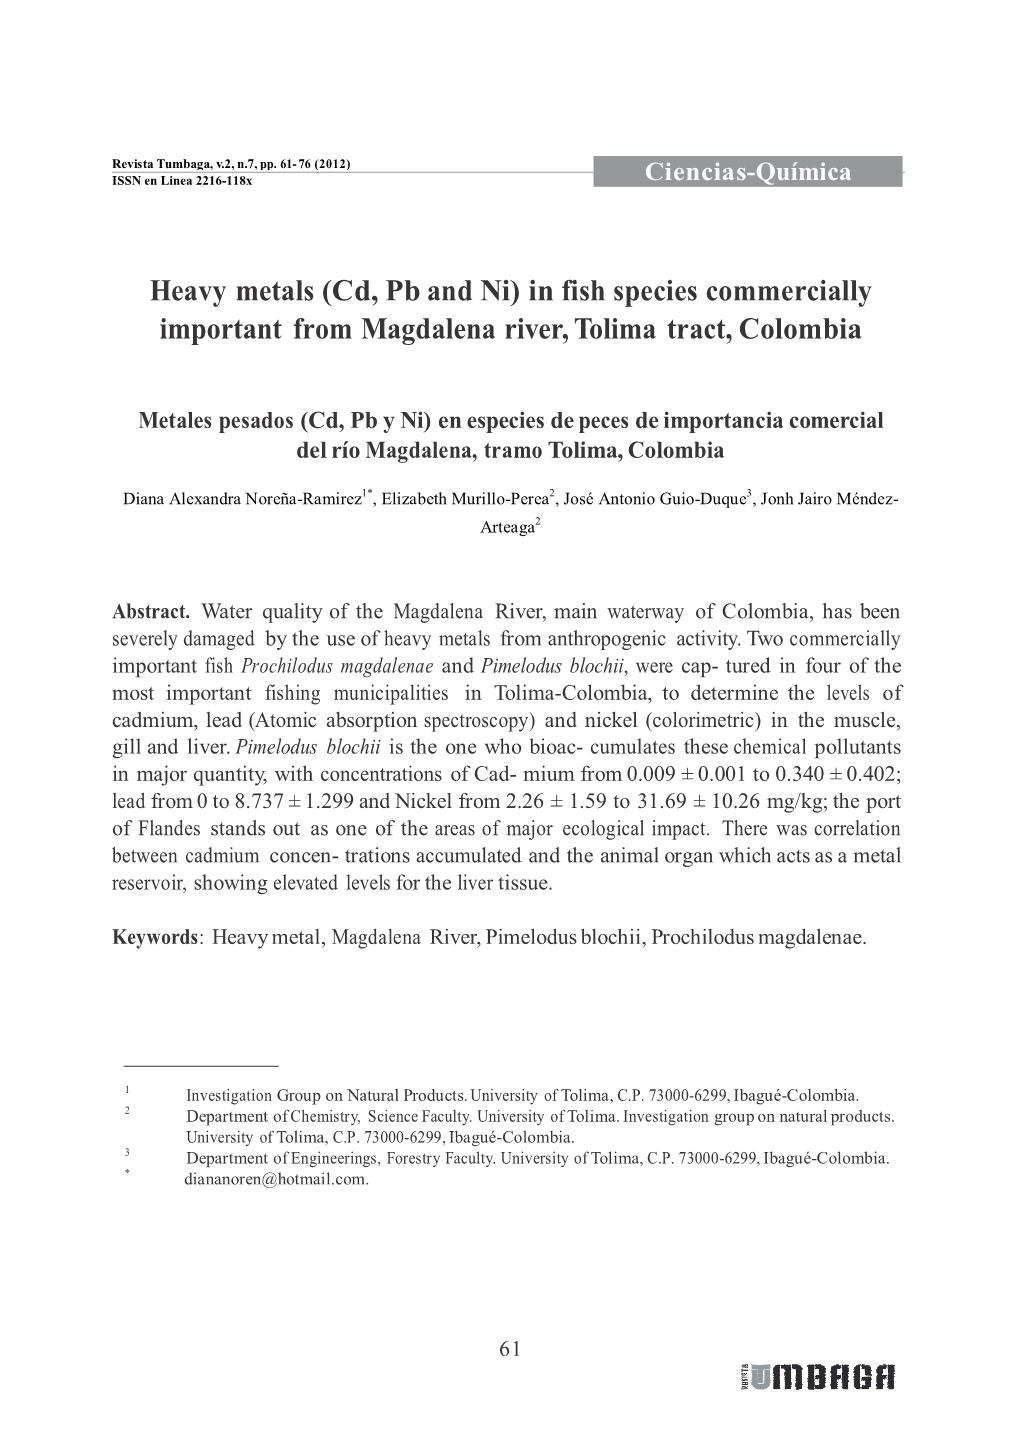 Heavy Metals (Cd, Pb and Ni) in Fish Species Commercially Important from Magdalena River, Tolima Tract, Colombia